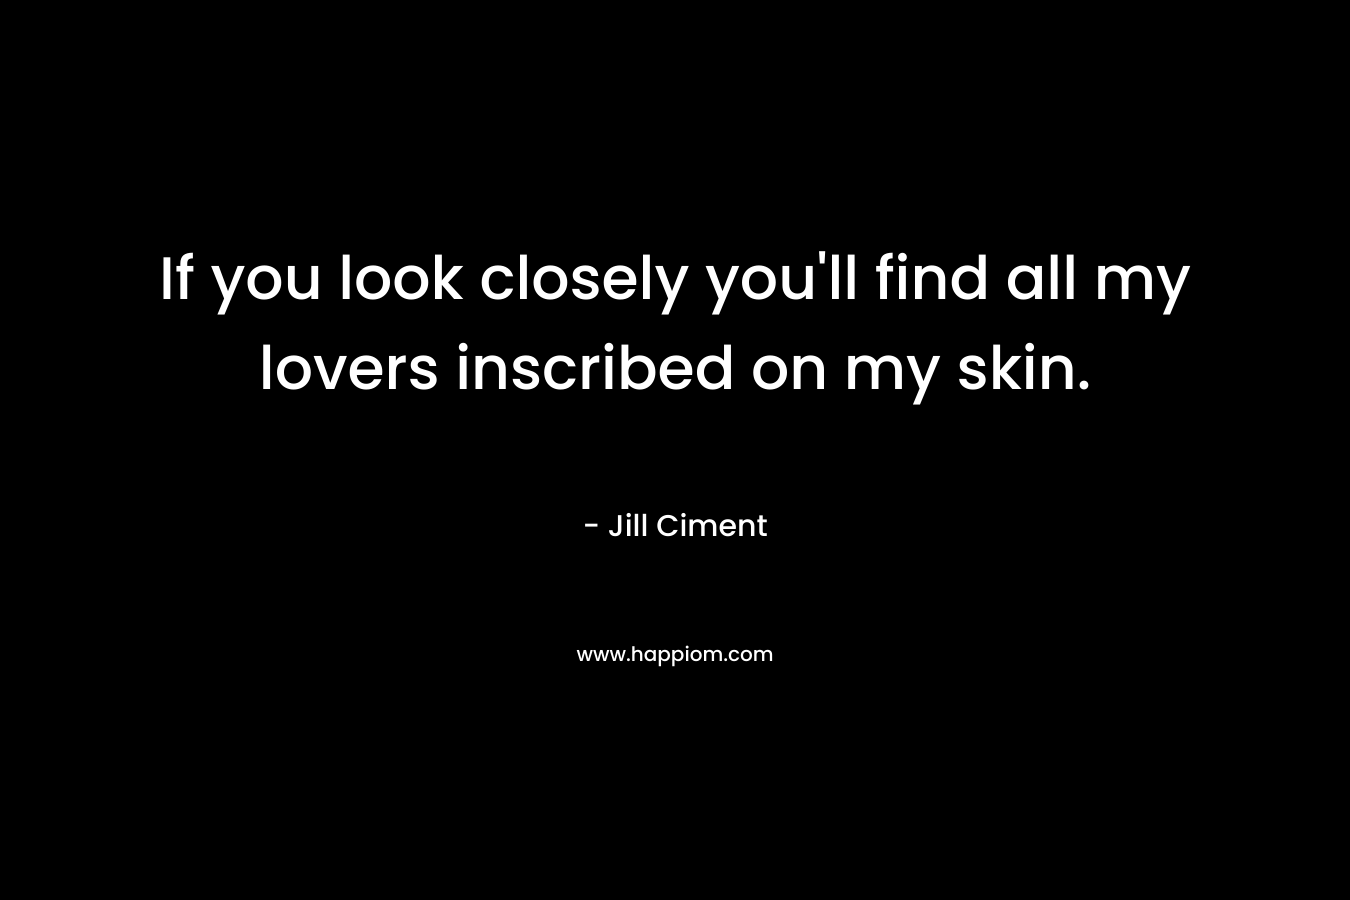 If you look closely you’ll find all my lovers inscribed on my skin. – Jill Ciment